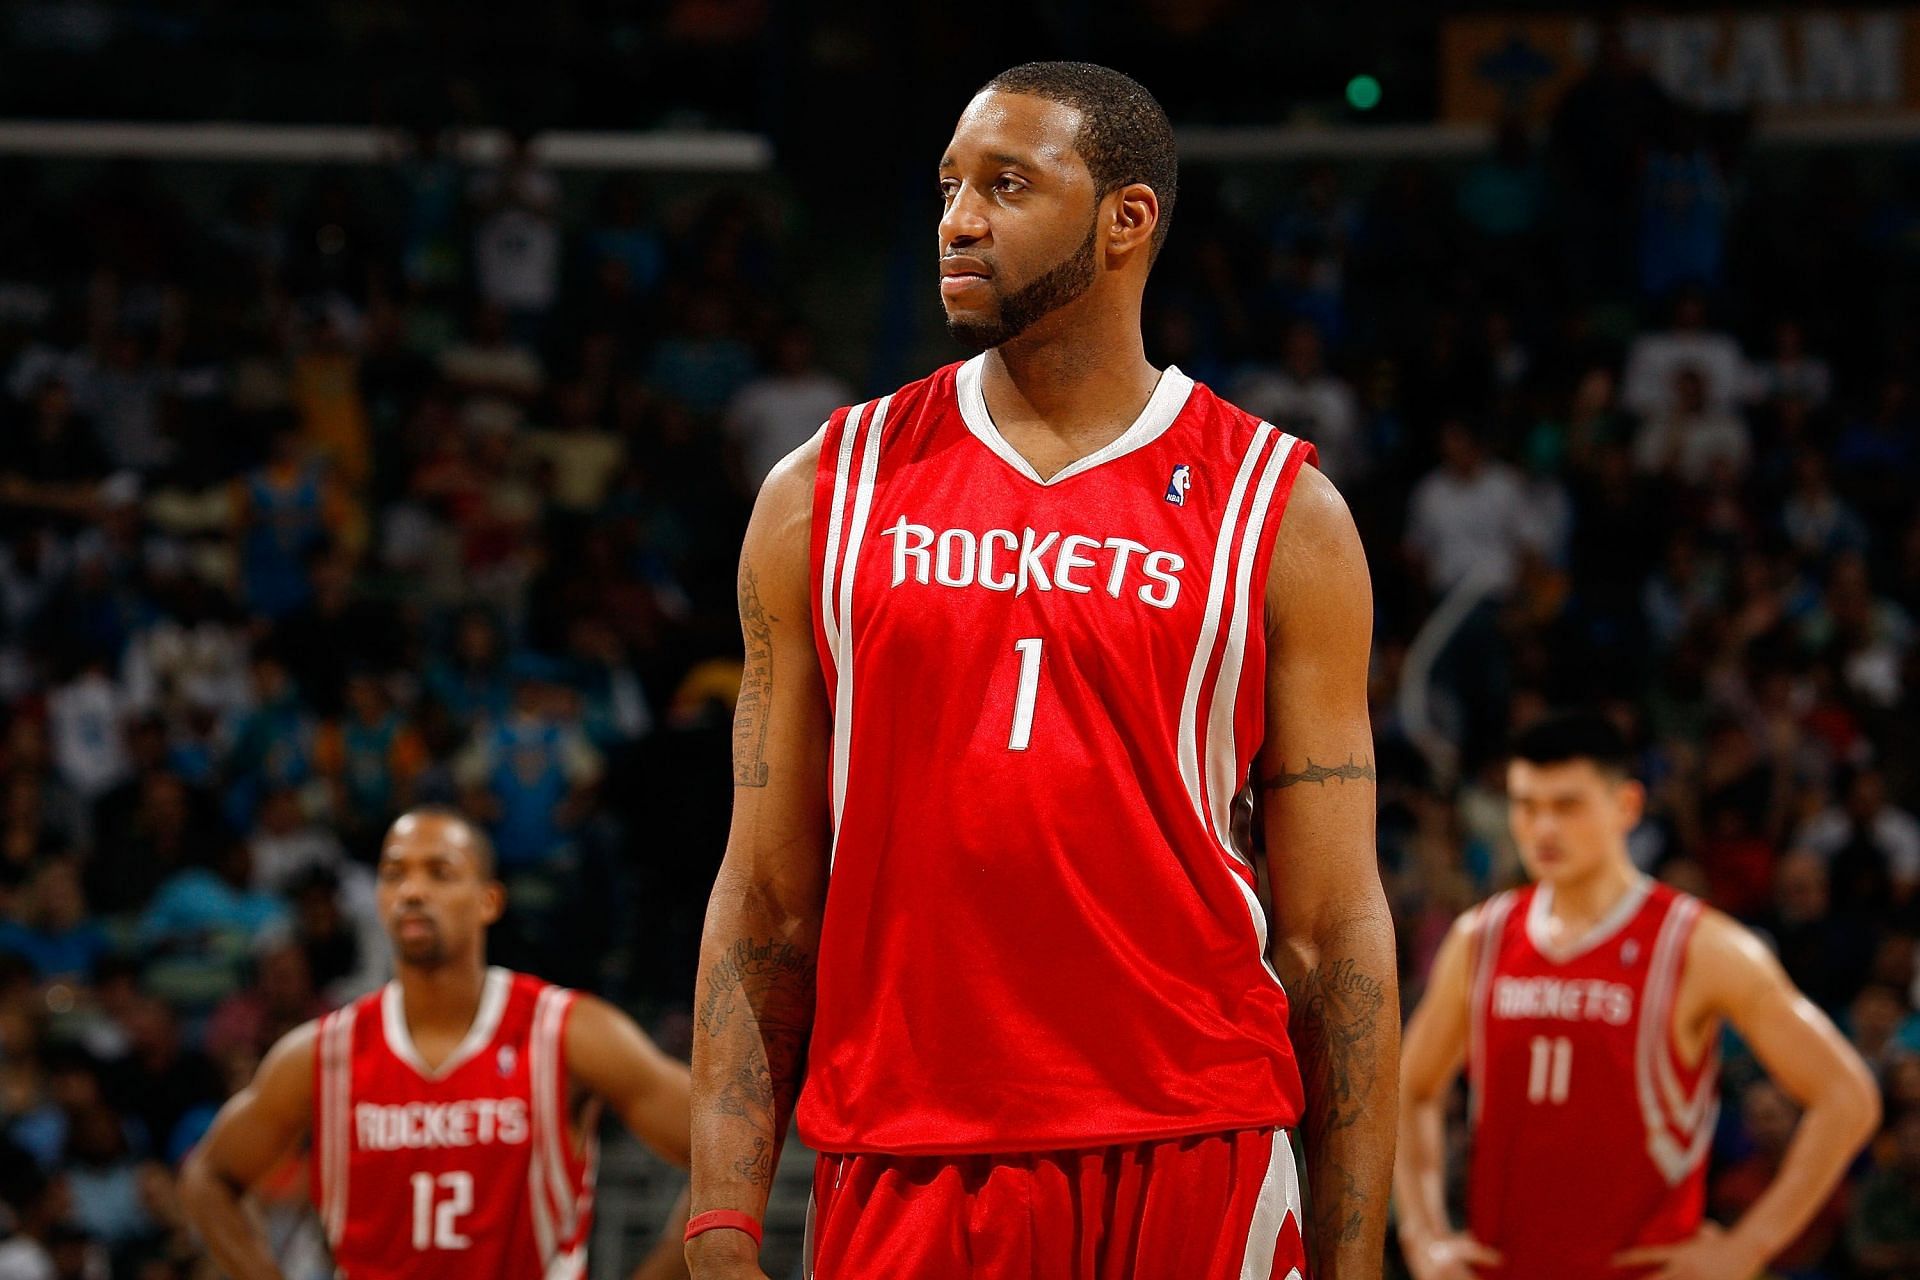 Tracy McGrady during his time with the Houston Rockets